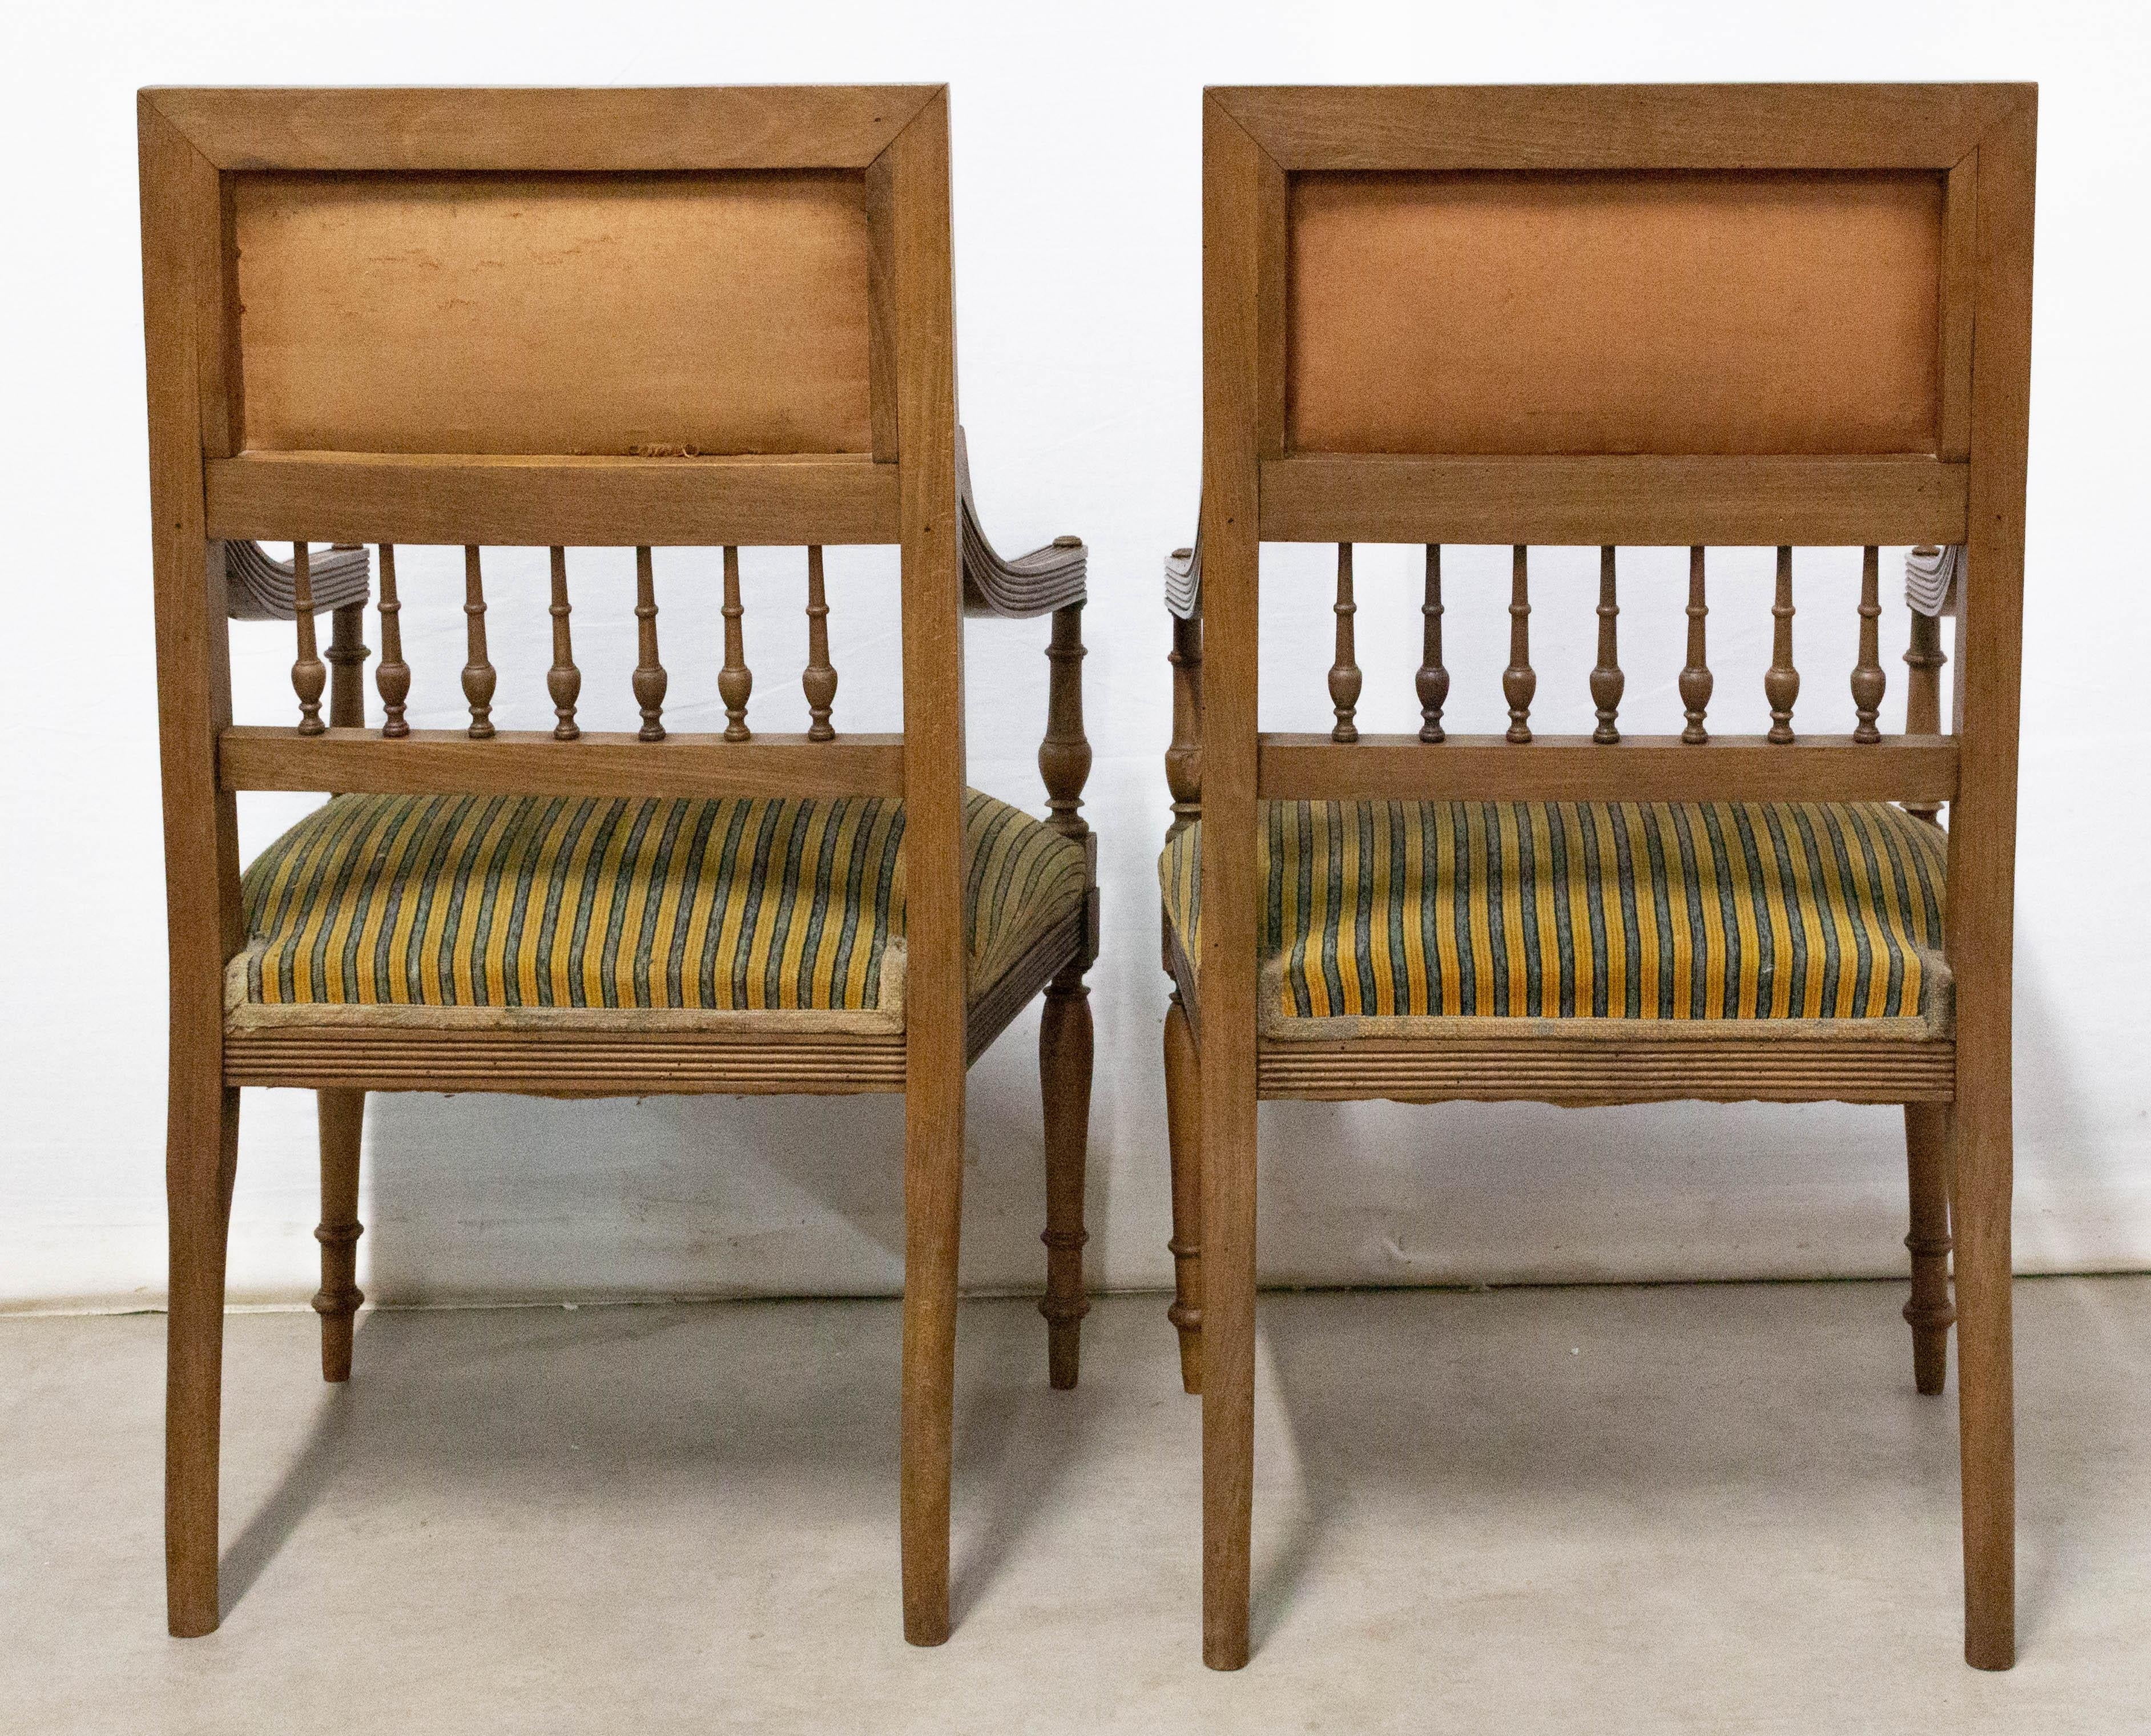 Fabric Pair of Louis XVI Revival Armchairs French, Early 20th Century